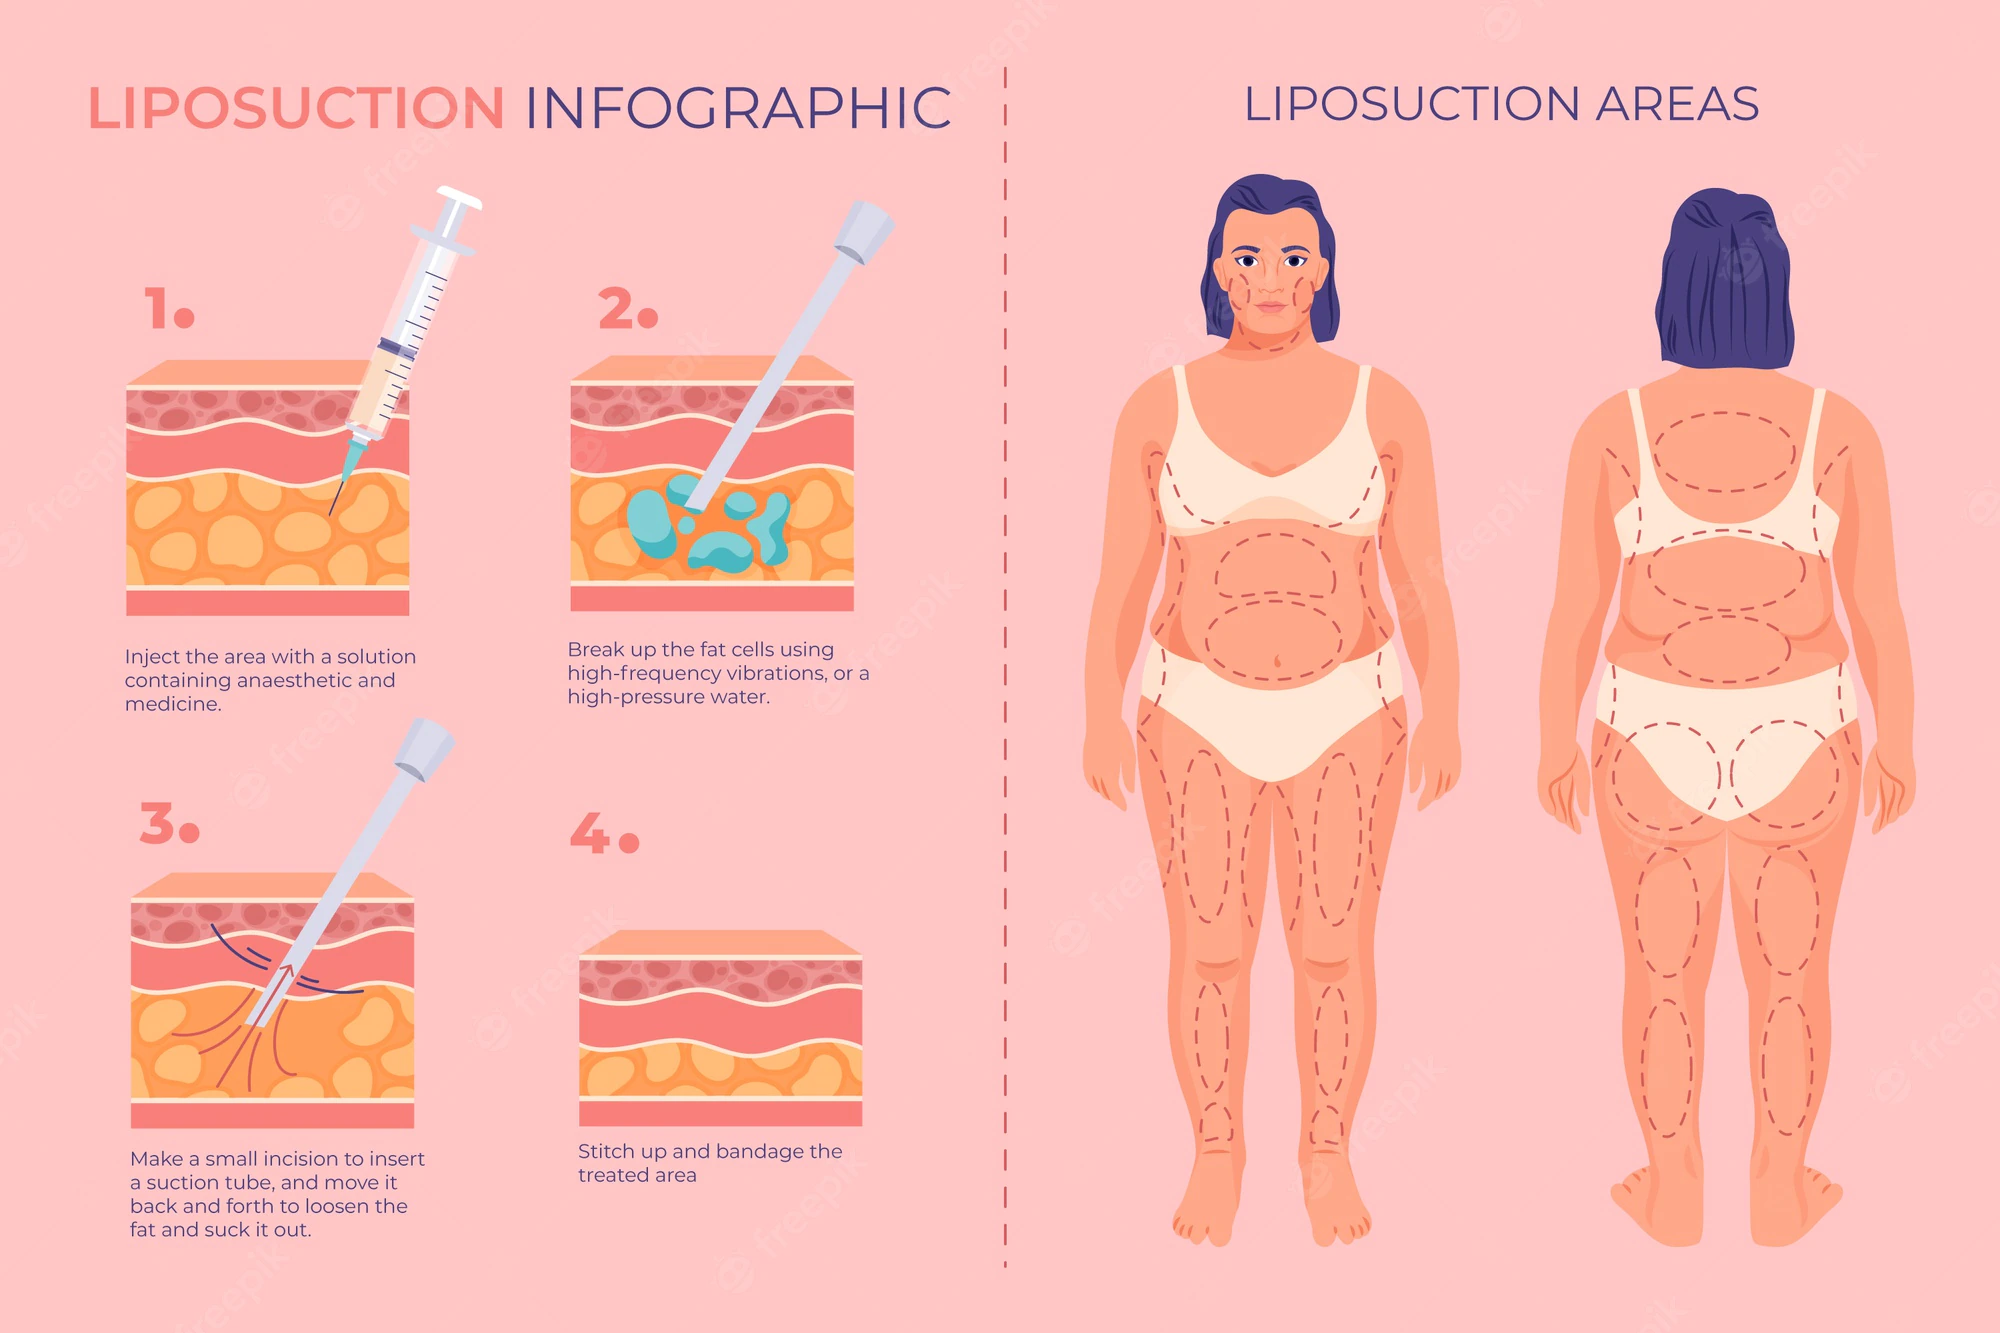 What is the cost of lipo injections in South Africa?